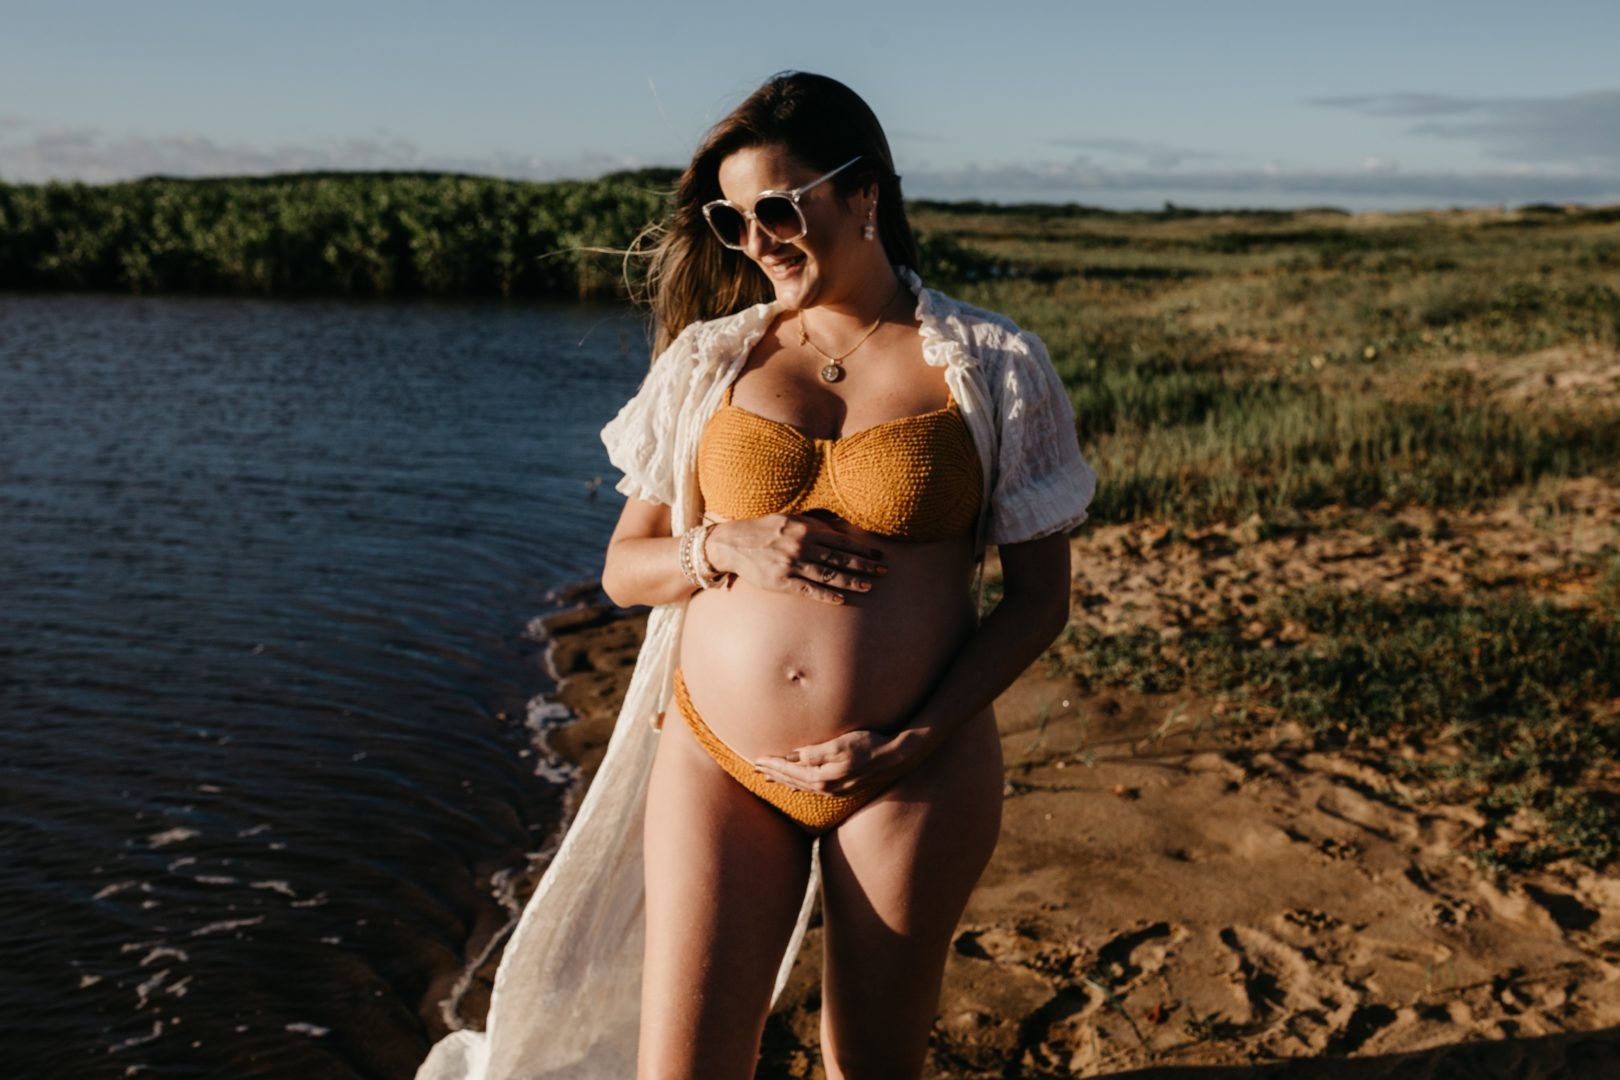 Is It Safe to Swim While Pregnant?